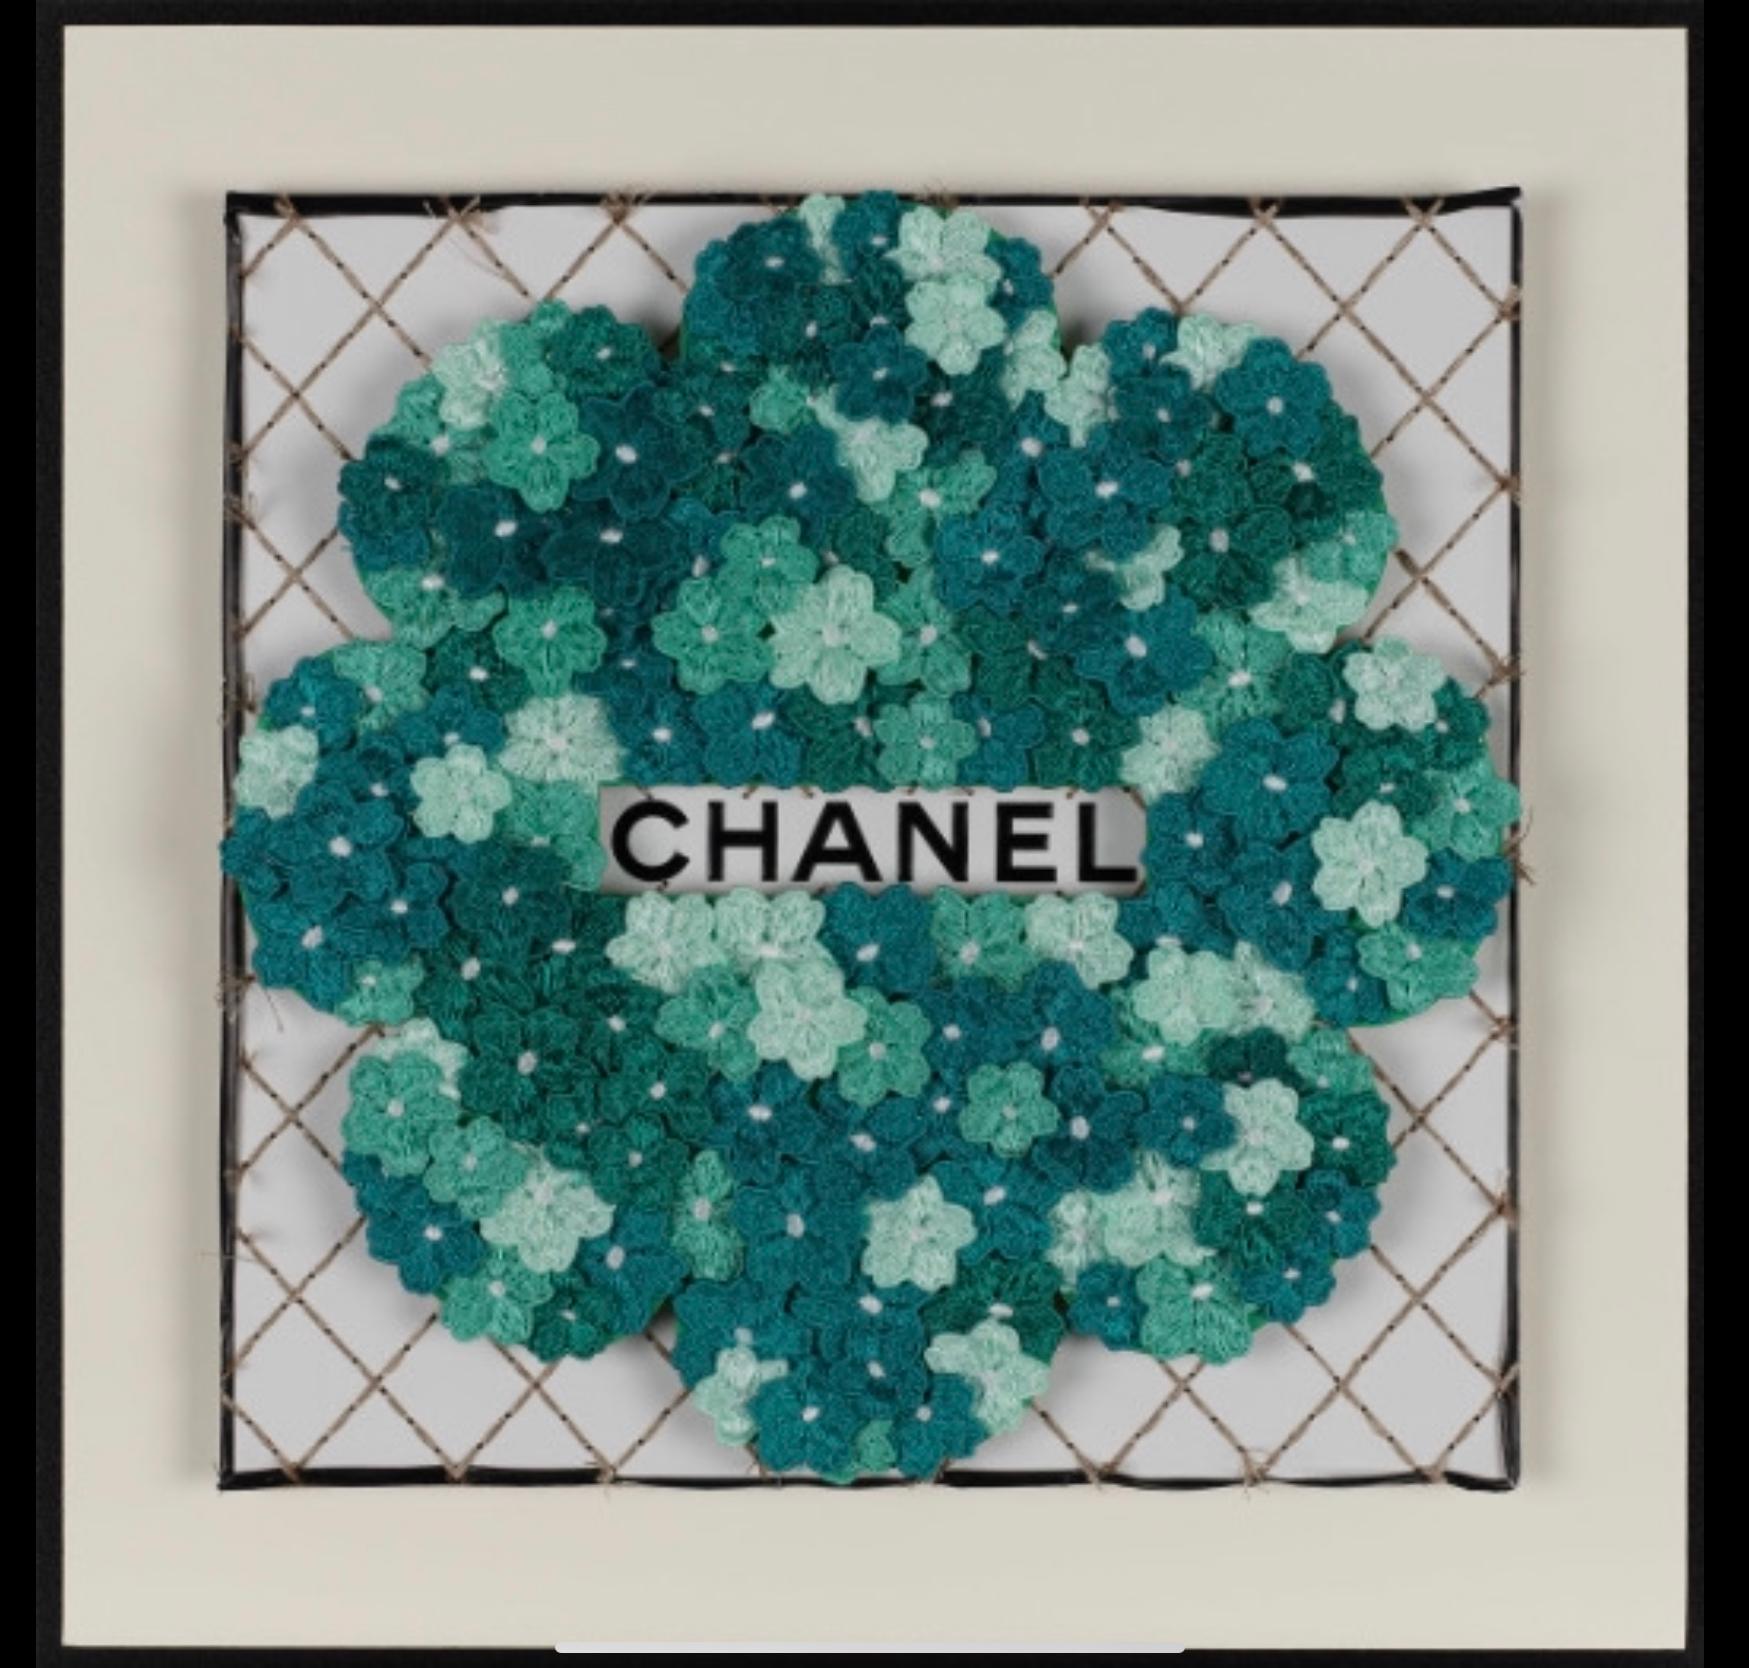 Chanel Flower (Teal), Embroidery Assemblage  - Mixed Media Art by Stephen Wilson